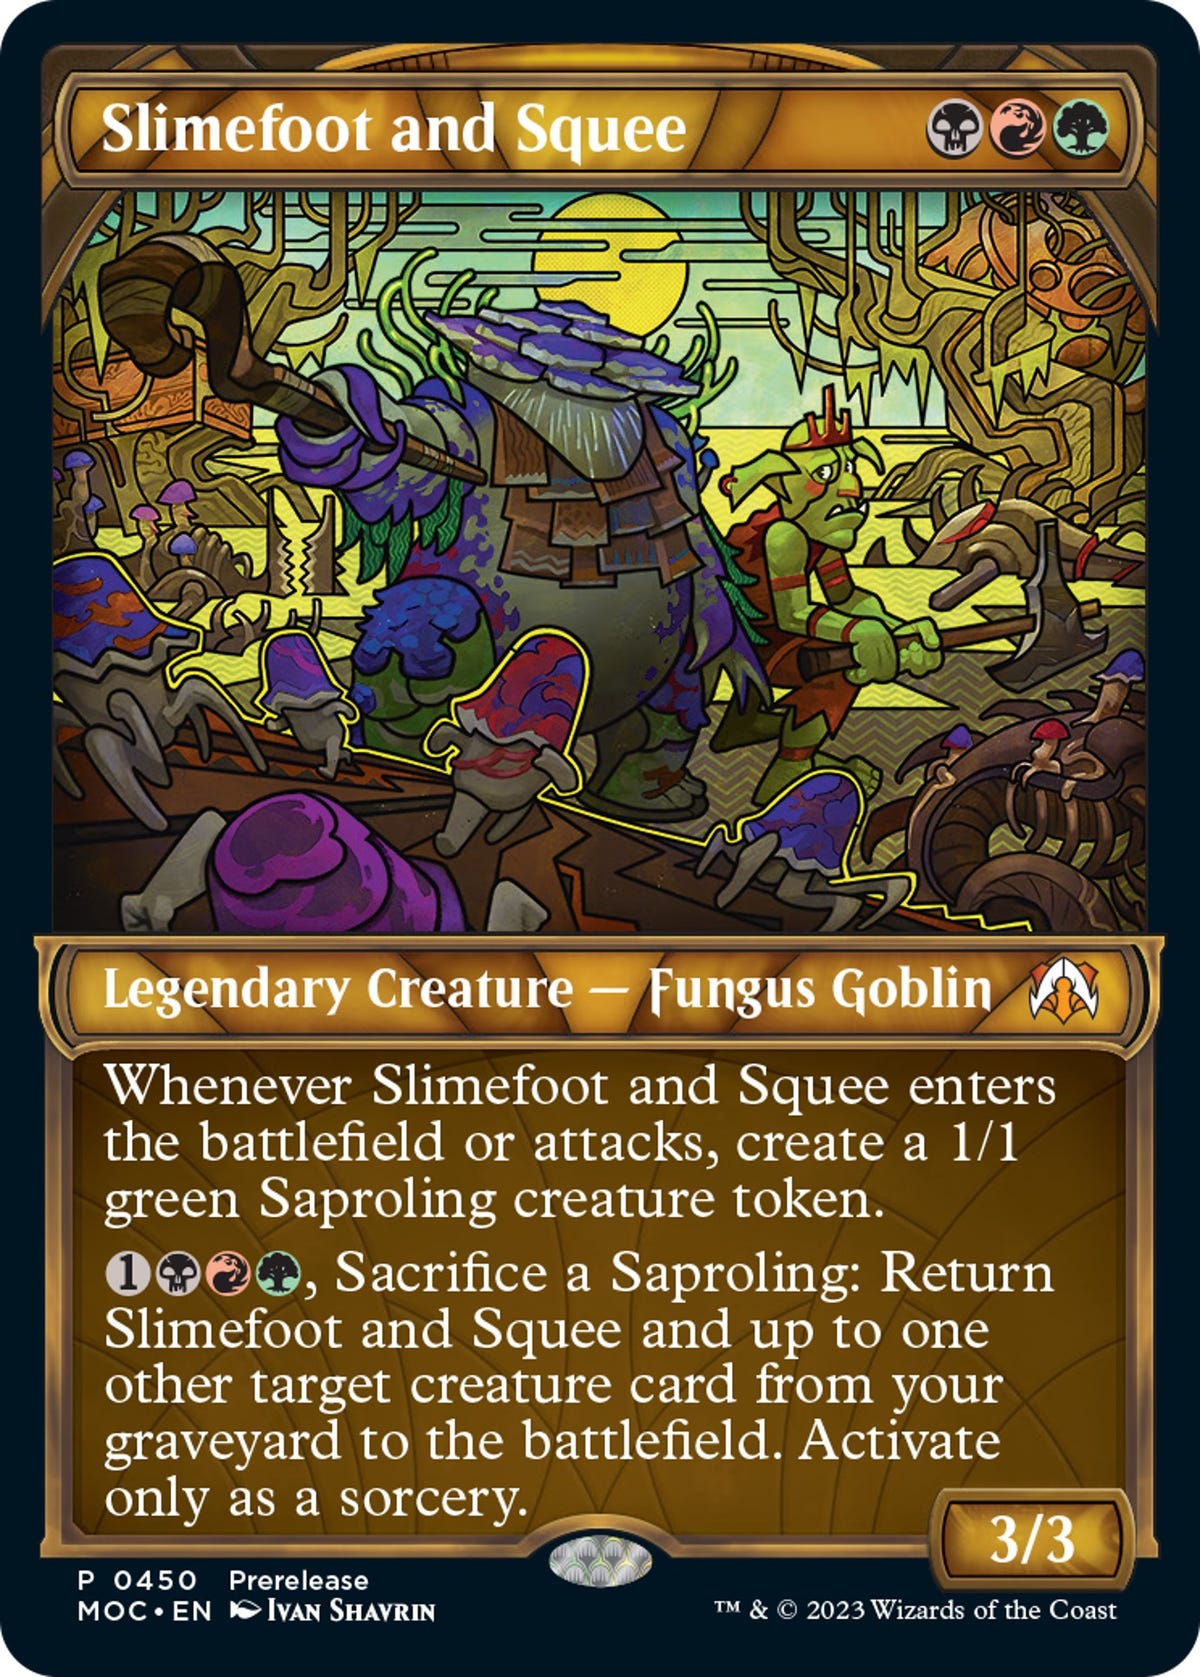 Overview of Slimefoot and squee cards